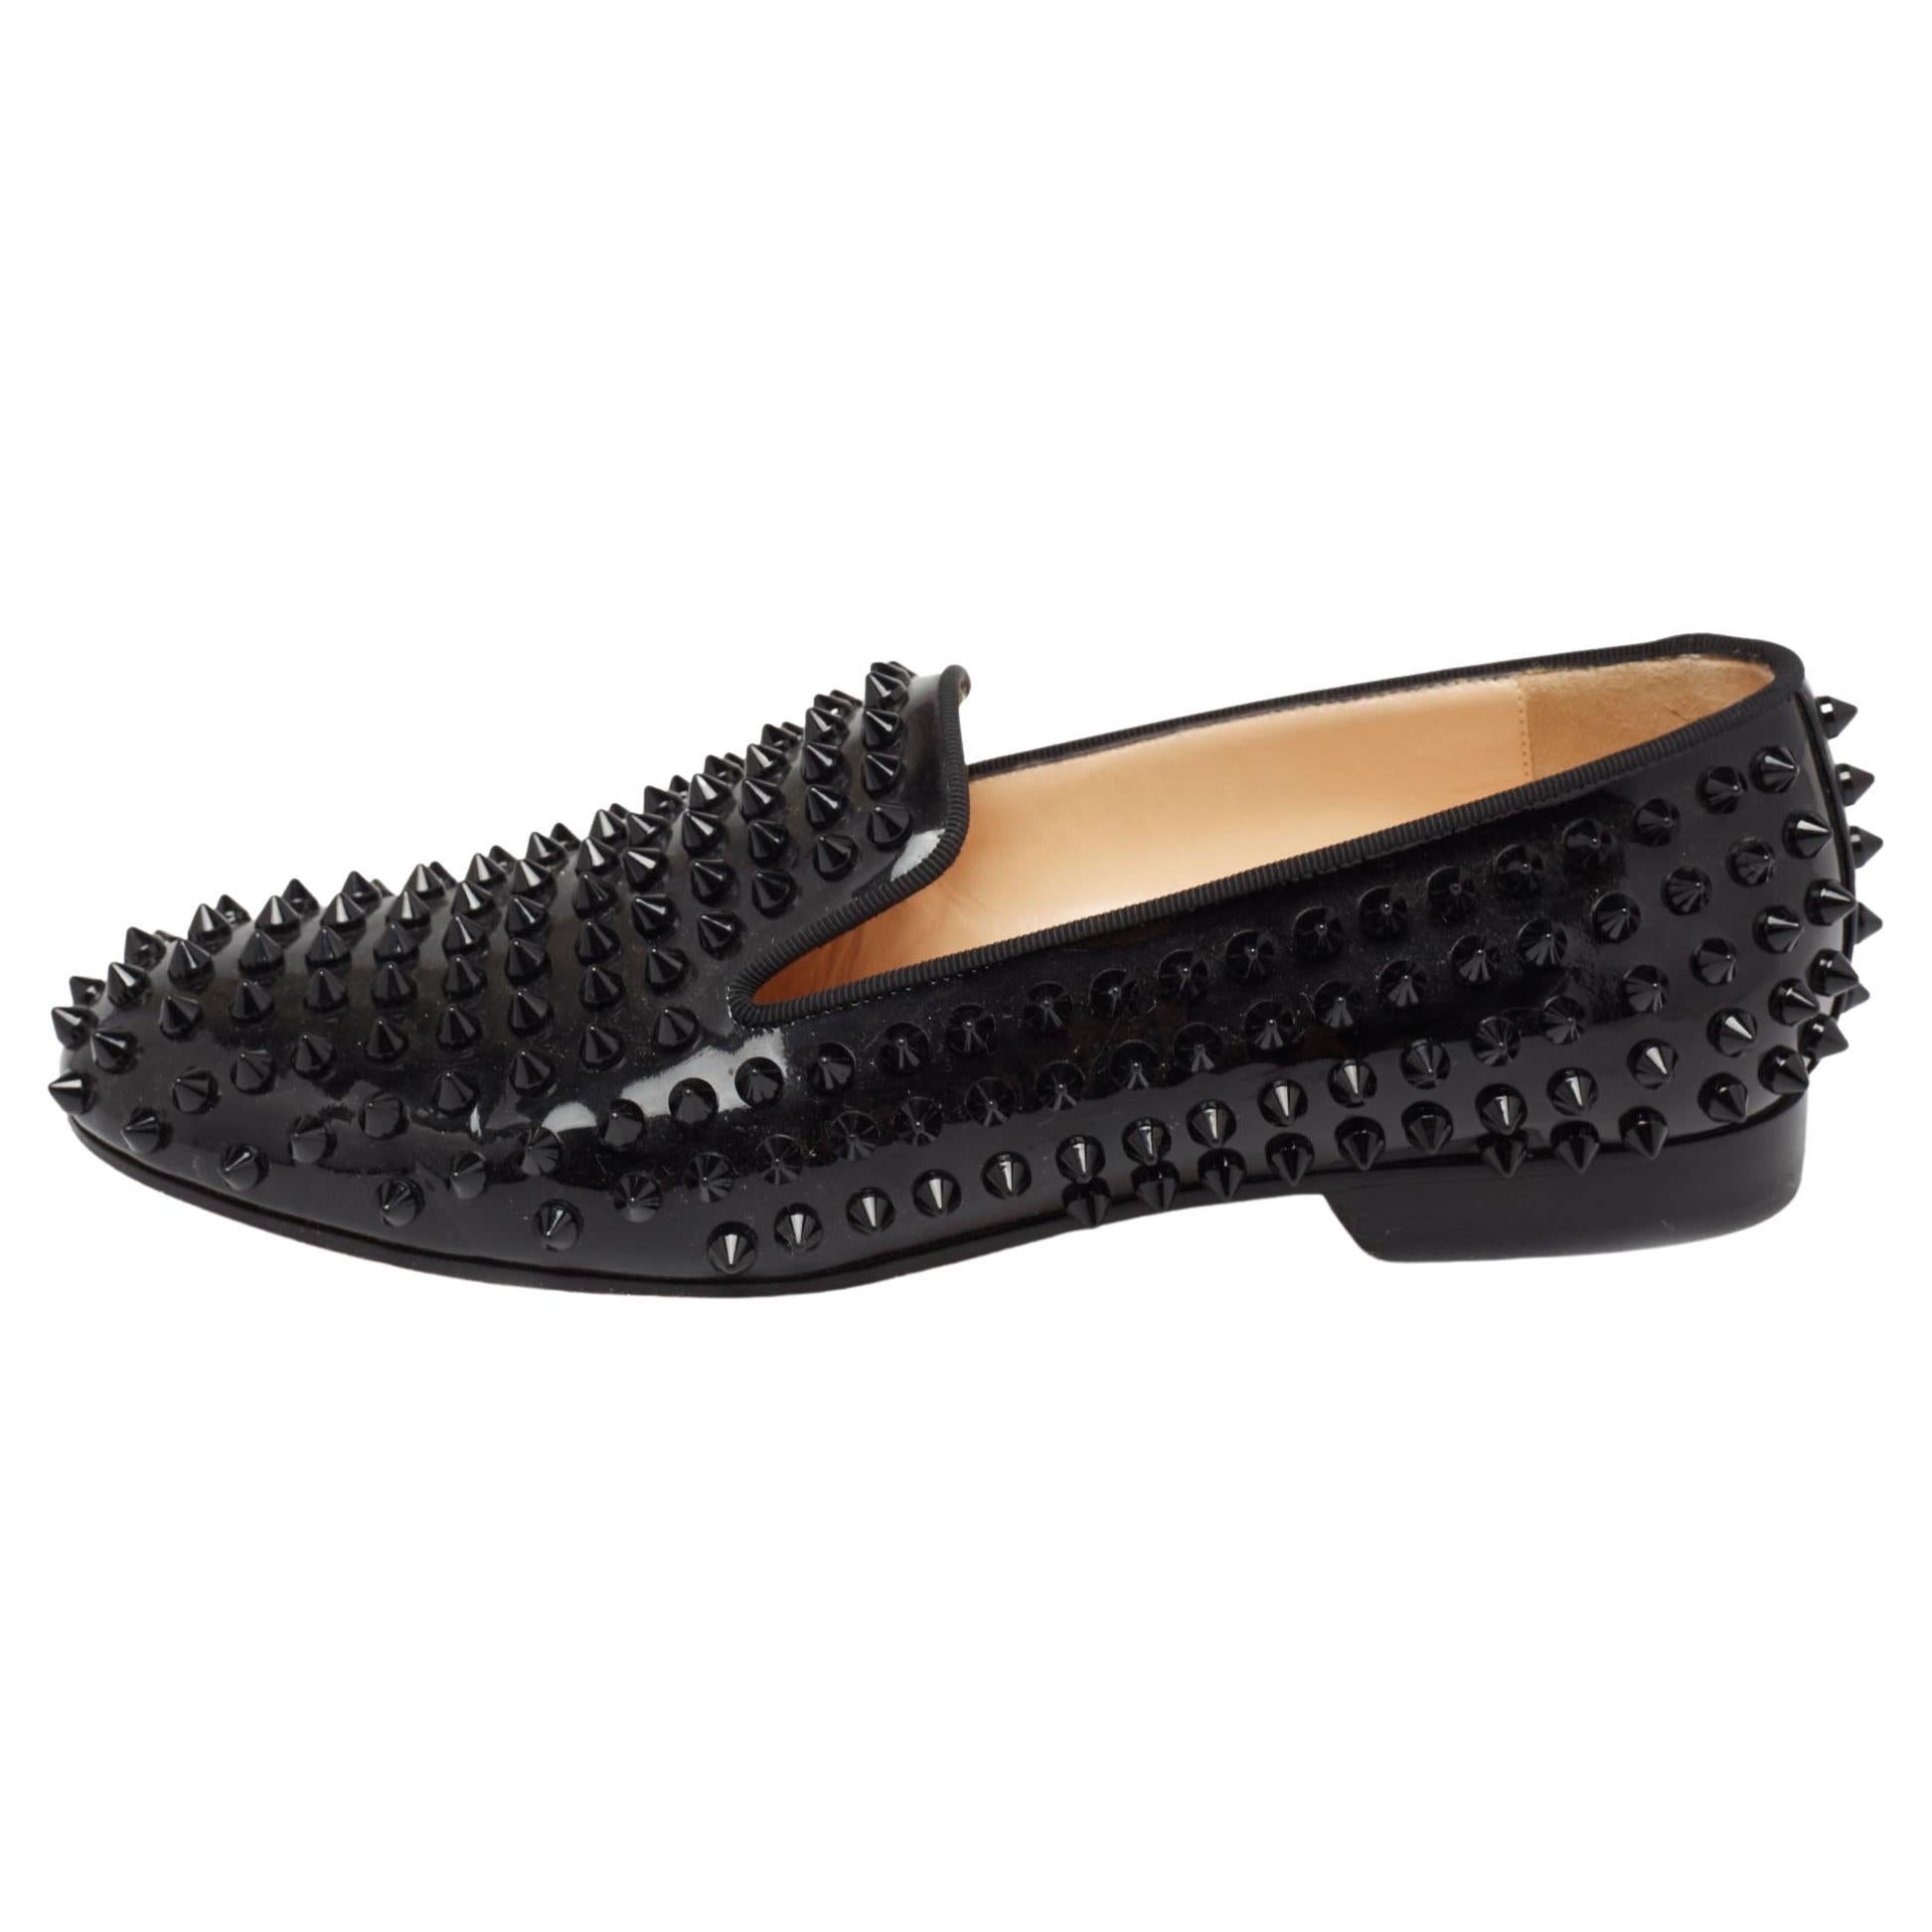 Christian Louboutin Black Patent Leather Dandelion Spikes Slippers Size 37 For Sale